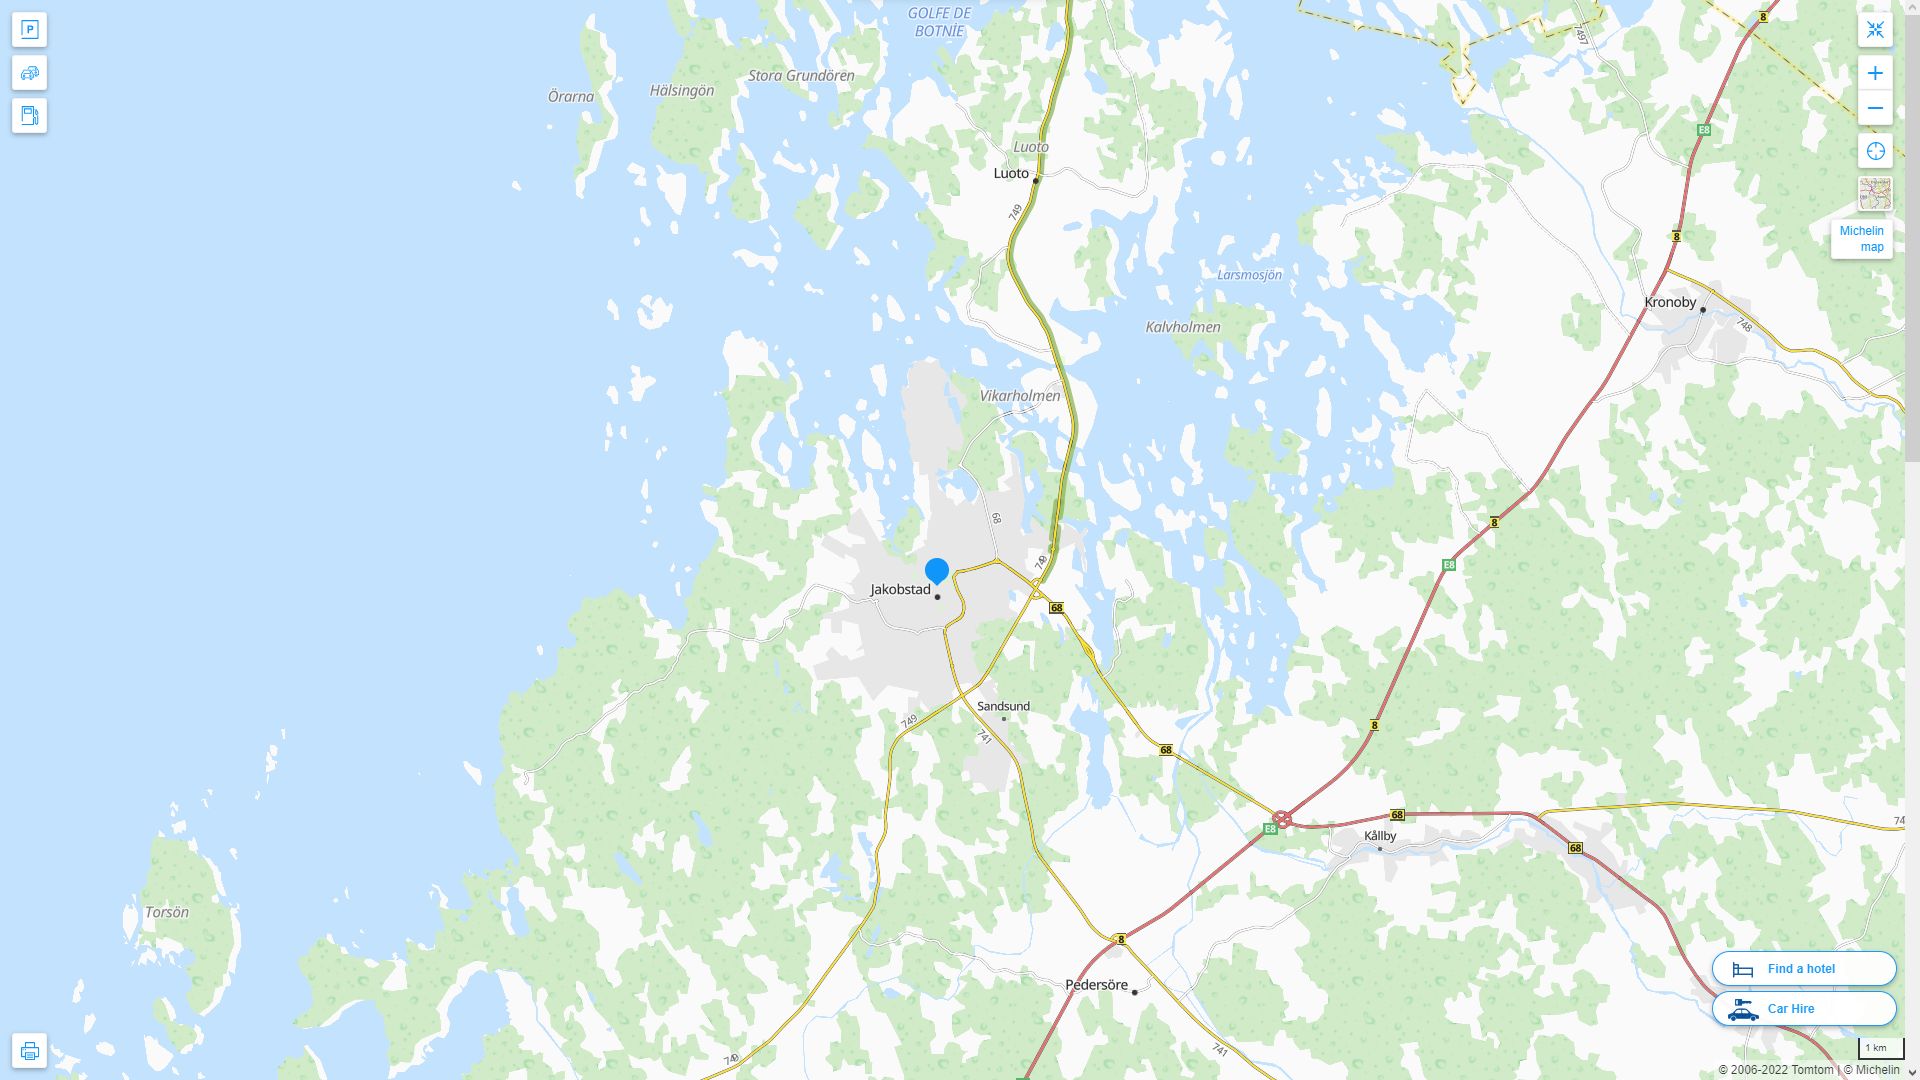 Jakobstad Highway and Road Map